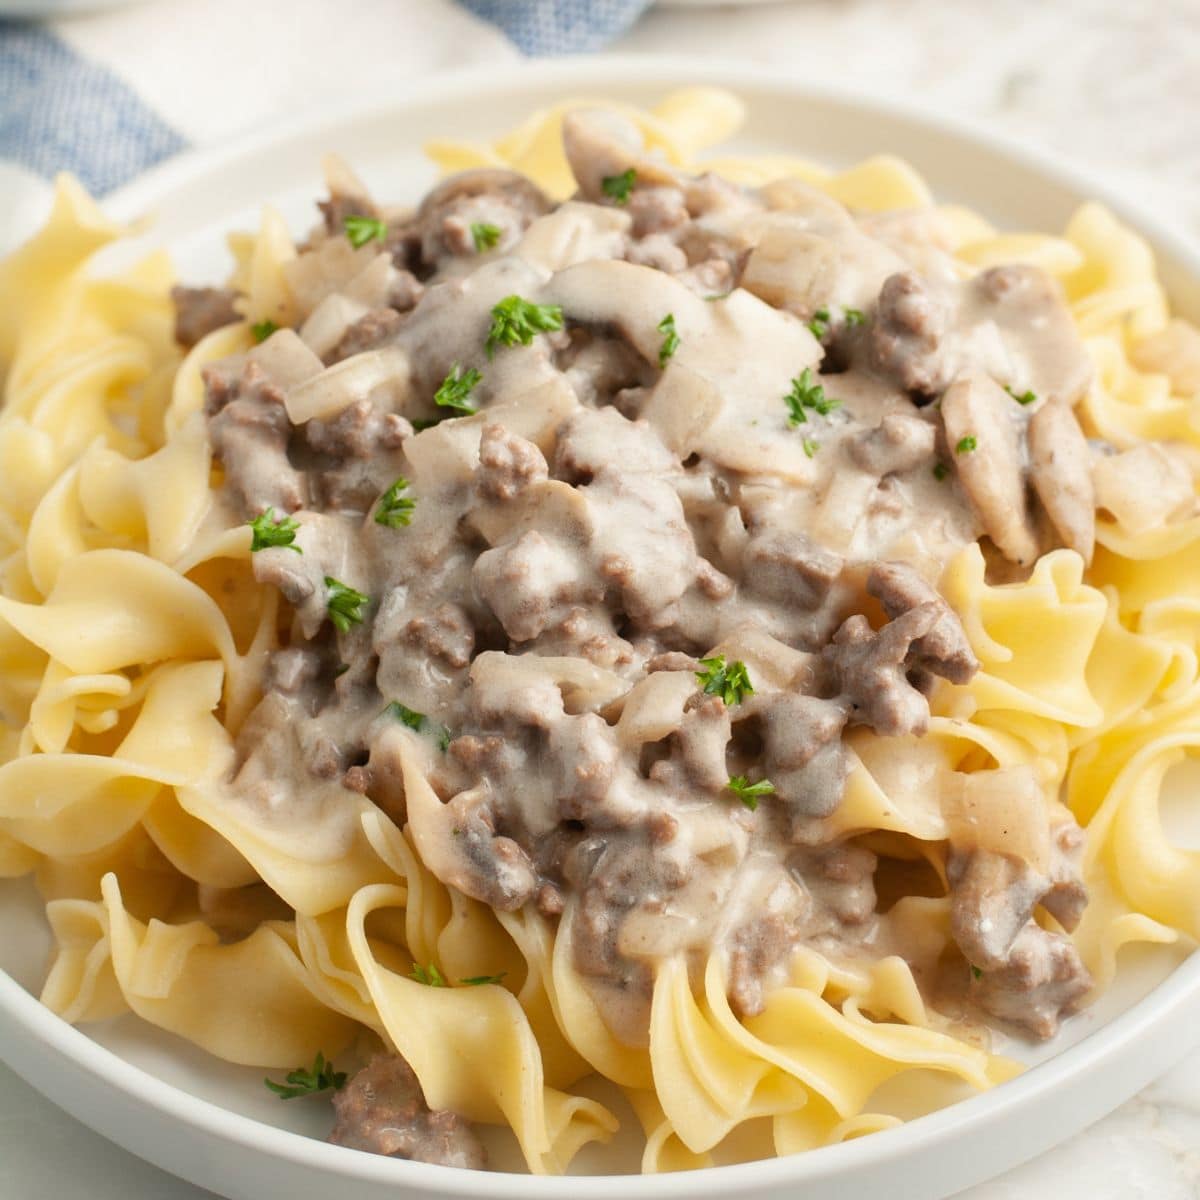 Plate of egg noodles with ground beef stroganoff.